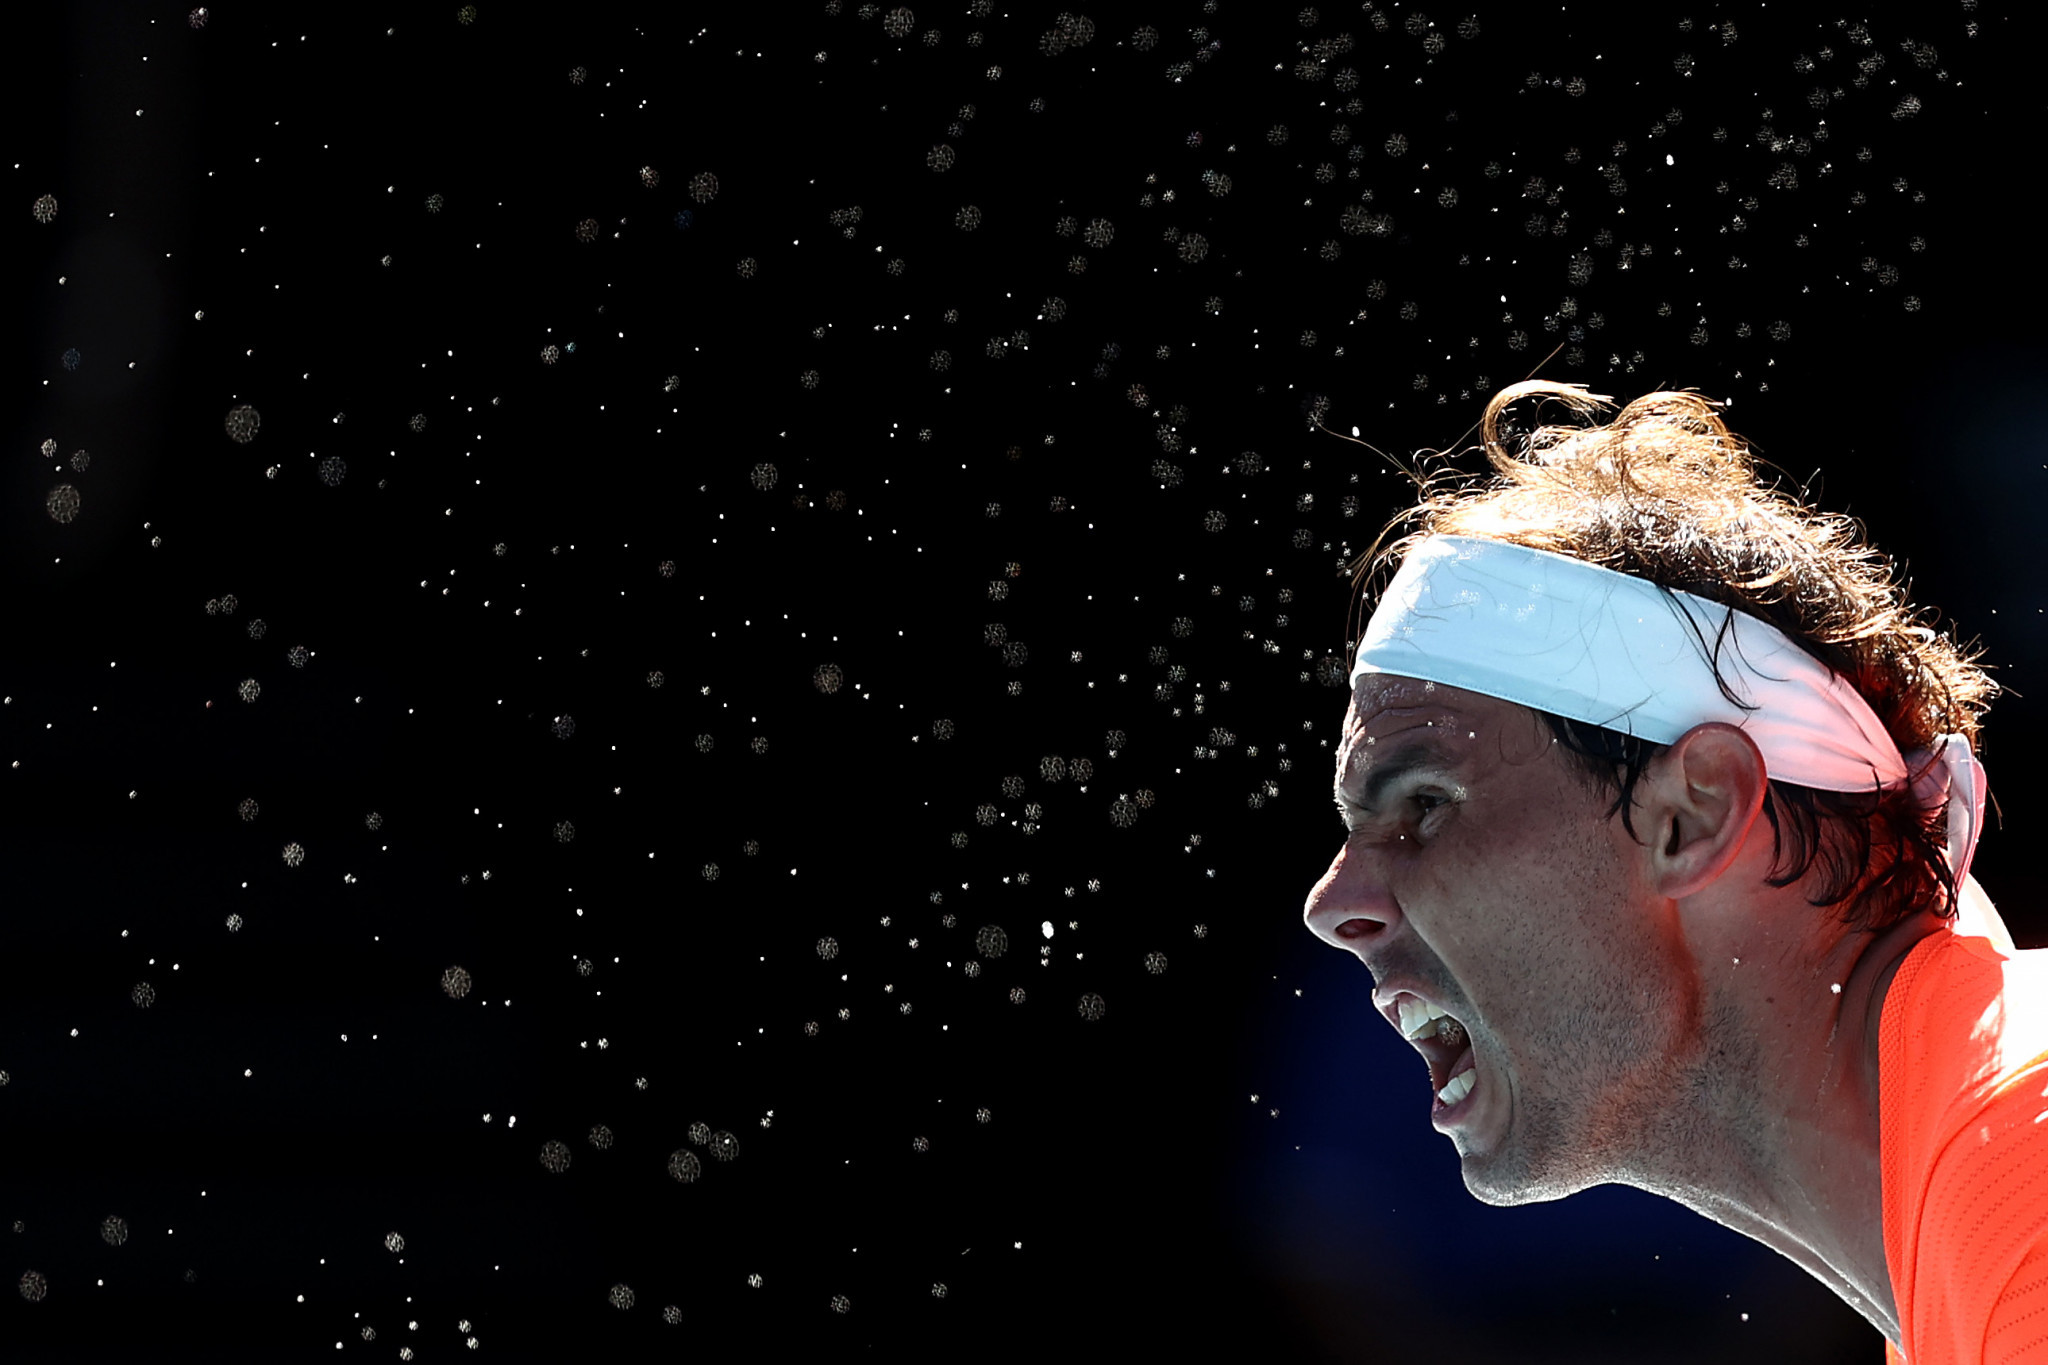 Spain's Rafael Nadal was a straight sets winner in his second round men's singles match at Melbourne Park ©Getty Images